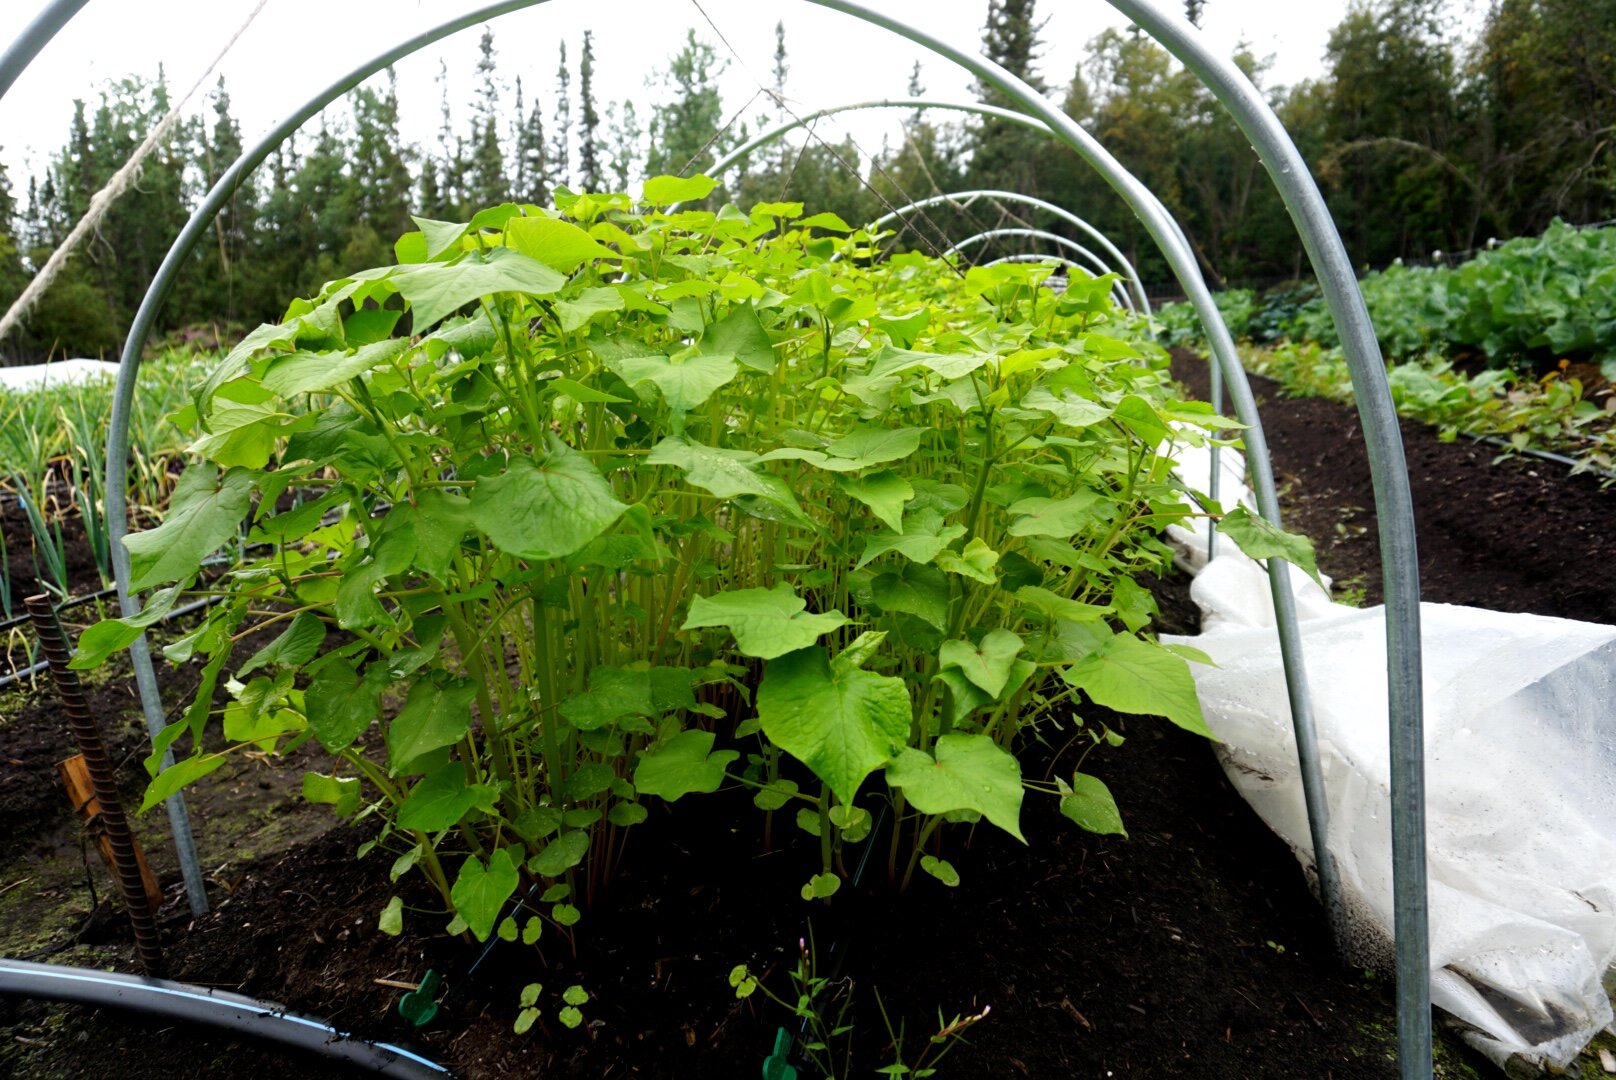  “Everybody told me I can’t grow green beans here. Well, I grew more green beans than I could eat or sell or put-up this summer under a low tunnel in the garden this year,” Nelson said. “And partly that’s because it’s been getting warmer and we had a